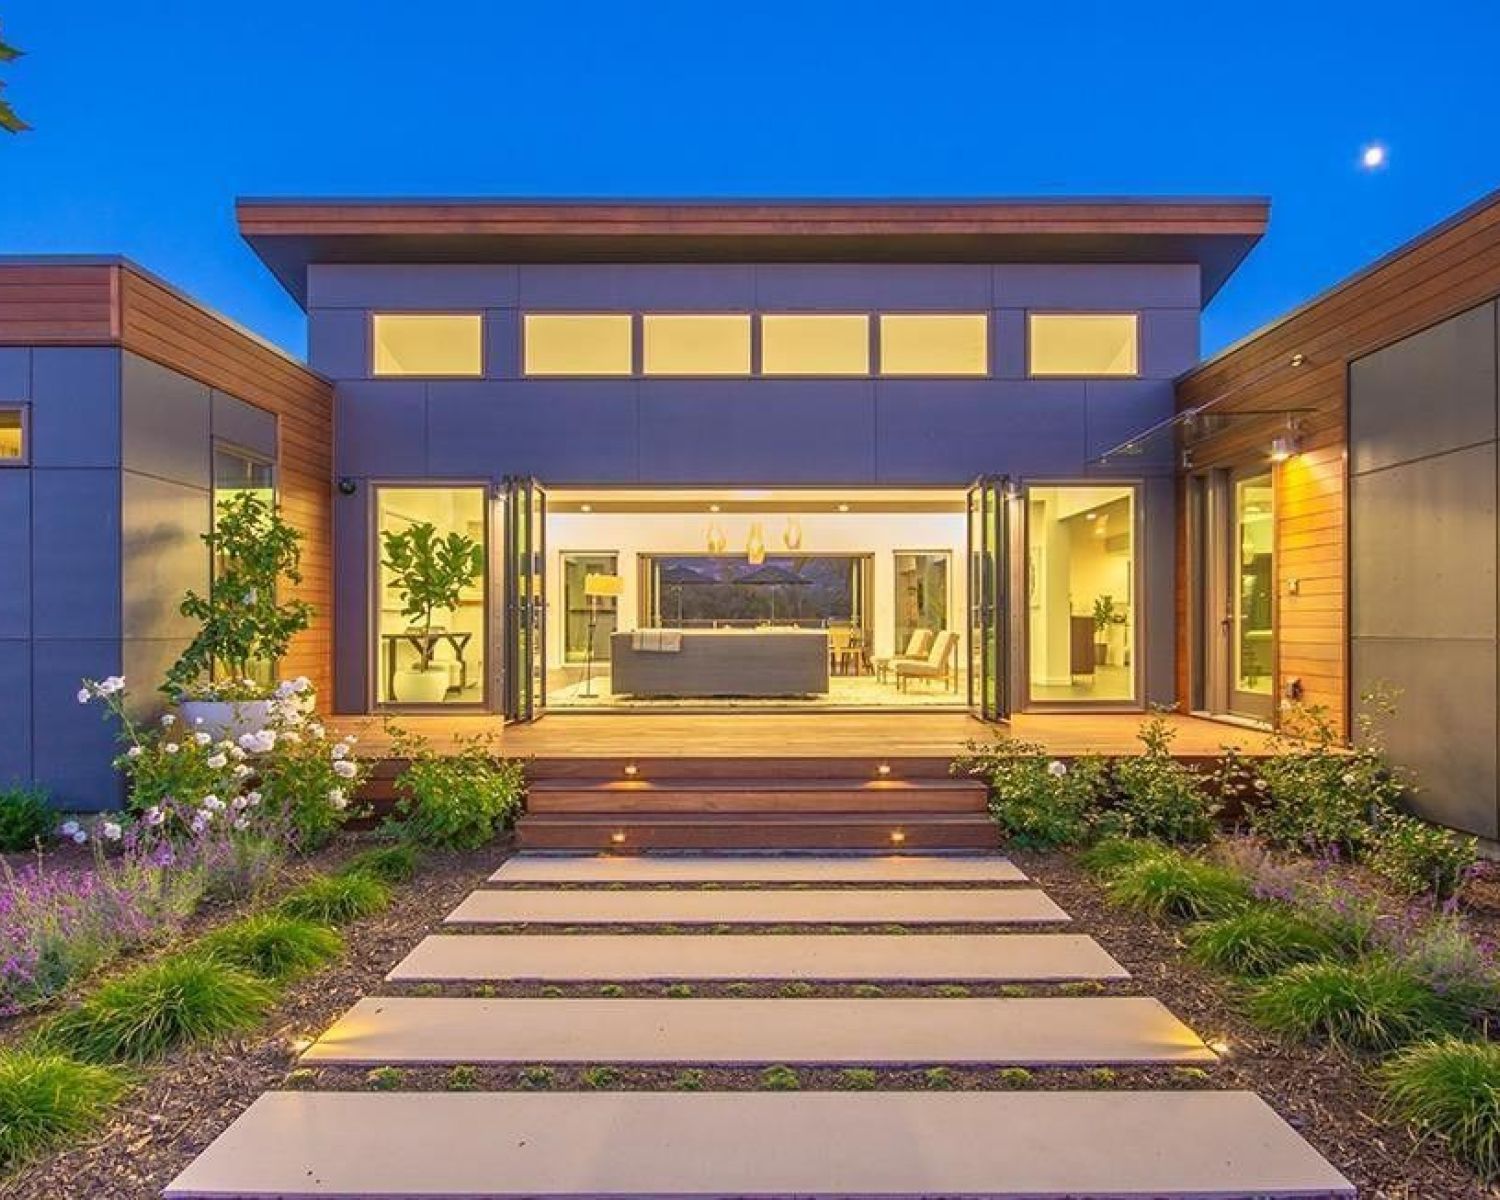 modern home lit up at dusk with glass front